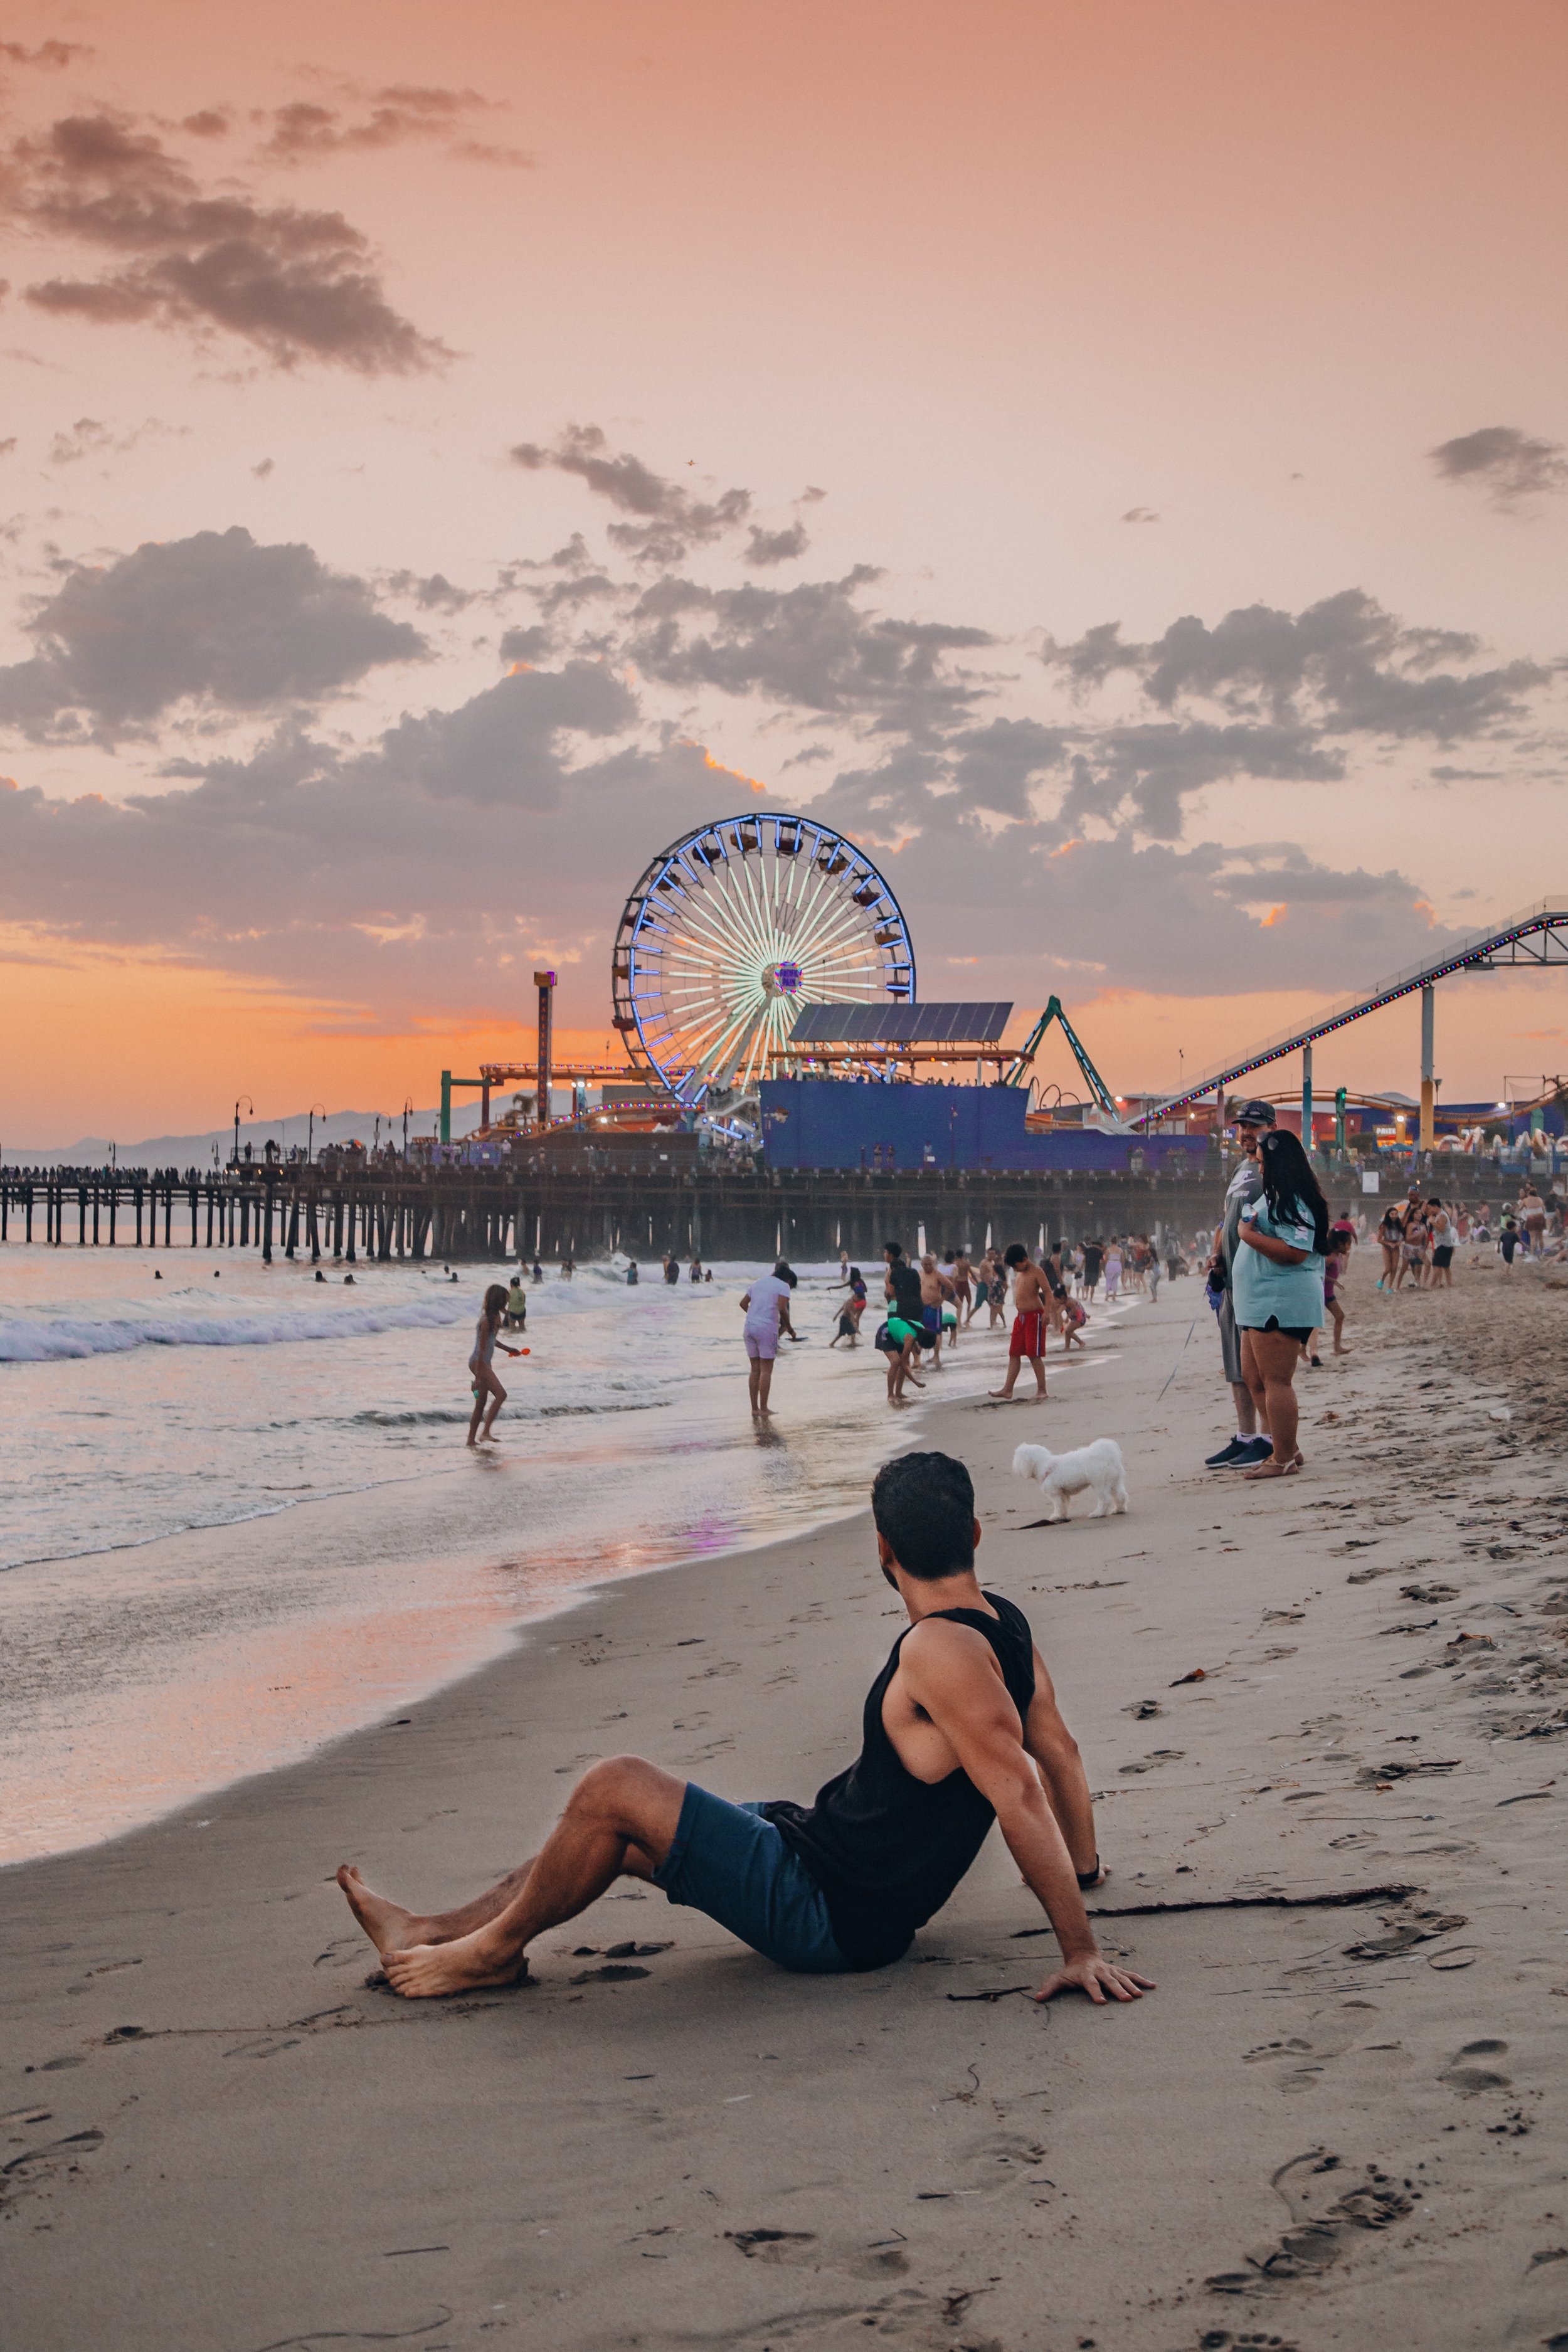 The famous Santa Monica Pier at sunset is such a vibrant place.